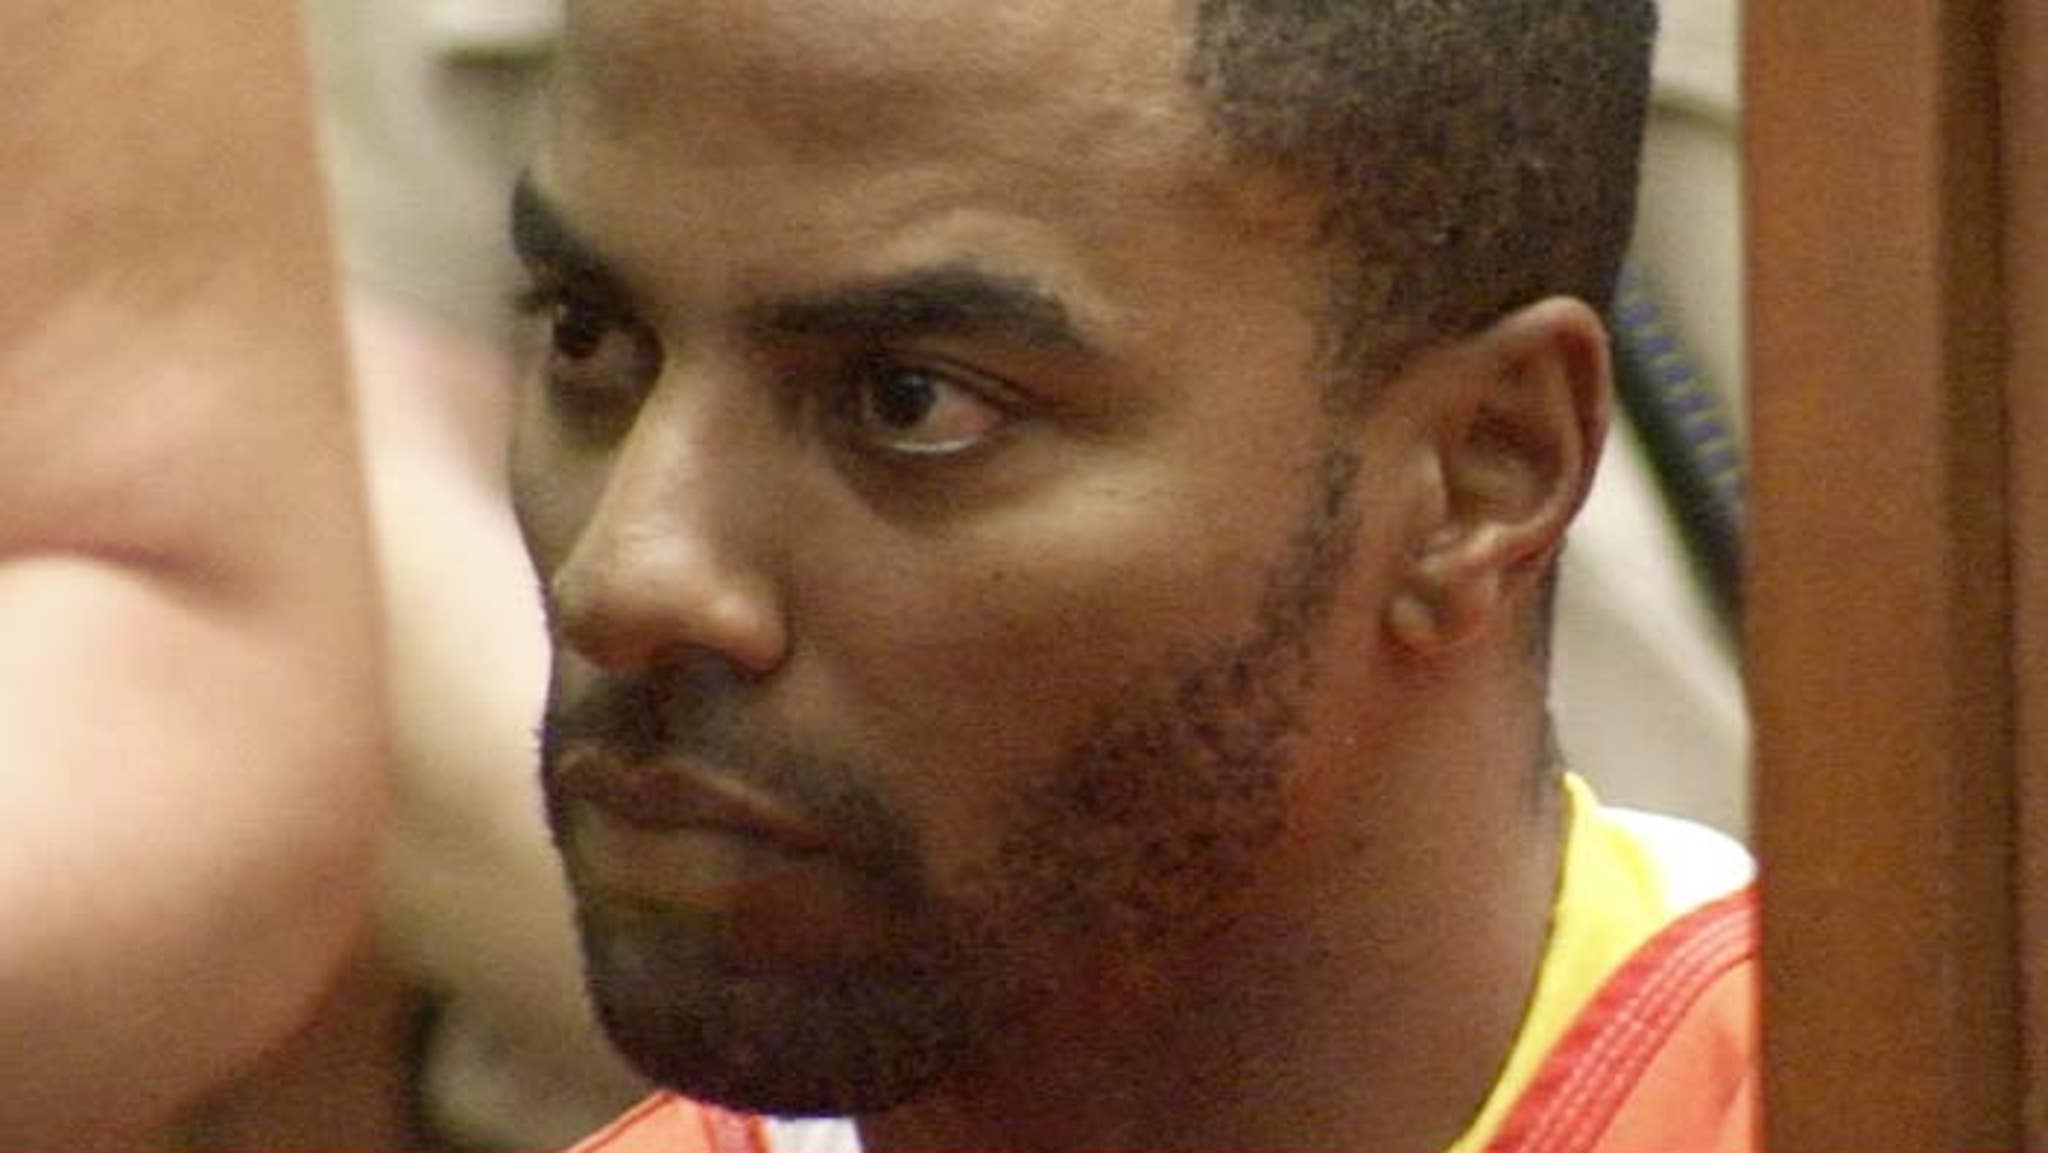 Darren Sharper will be sentenced to 20 years in Louisiana for raping 3 wome...